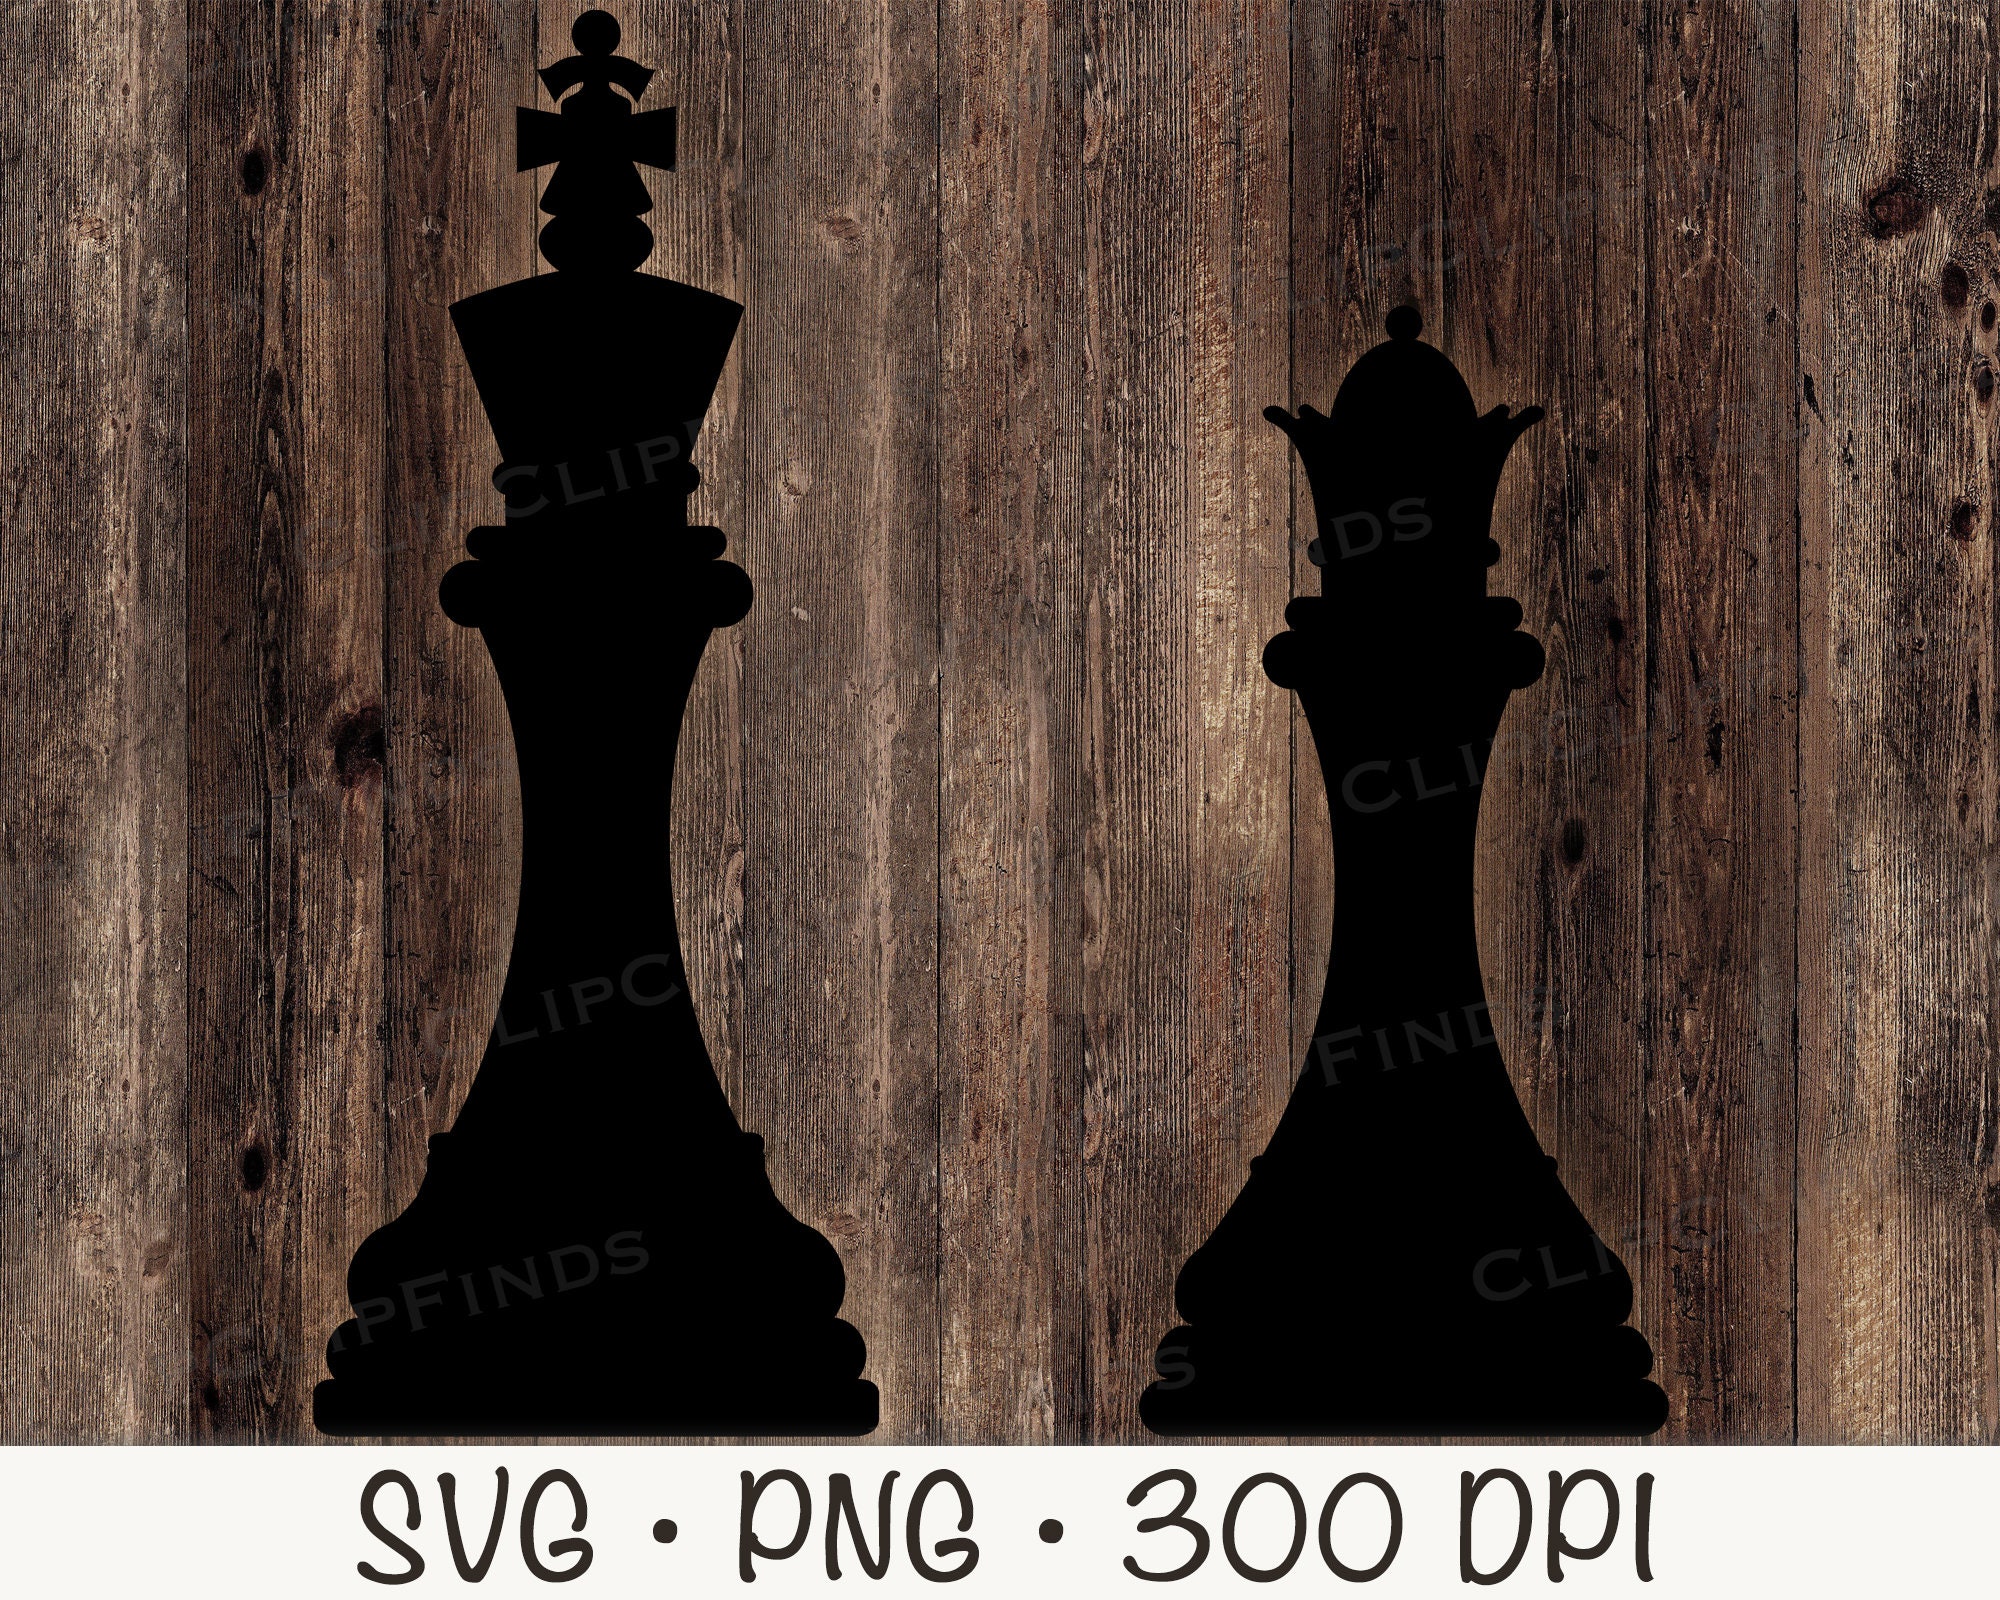 Chess King and Queen SVG Vector Cut File and PNG Transparent